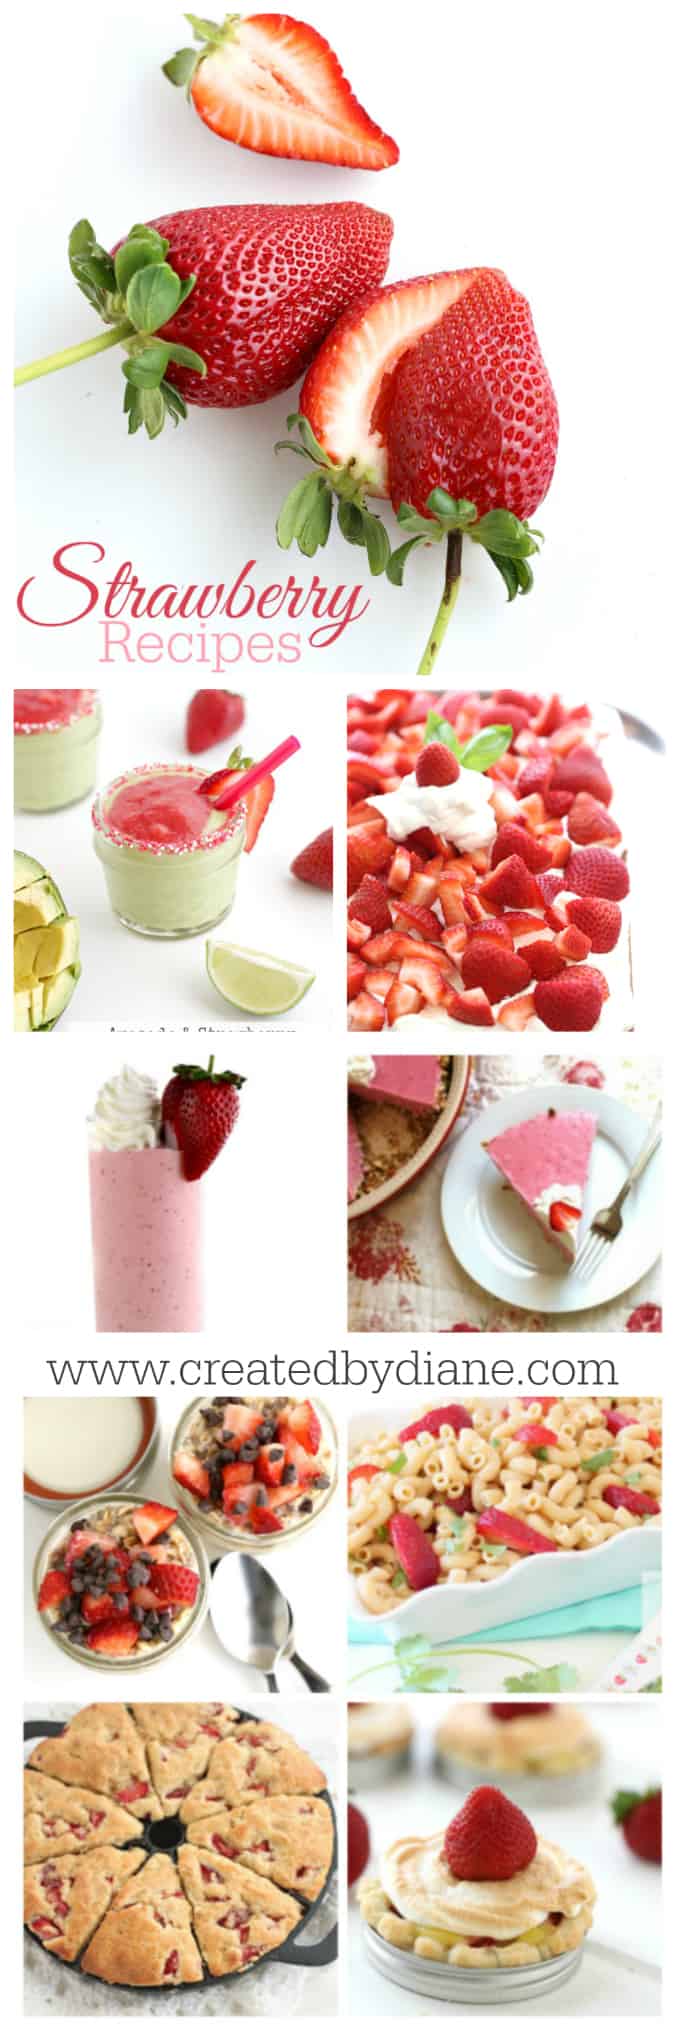 Strawberry Recipes are delicious and easy to make from www.createdbydiane.com